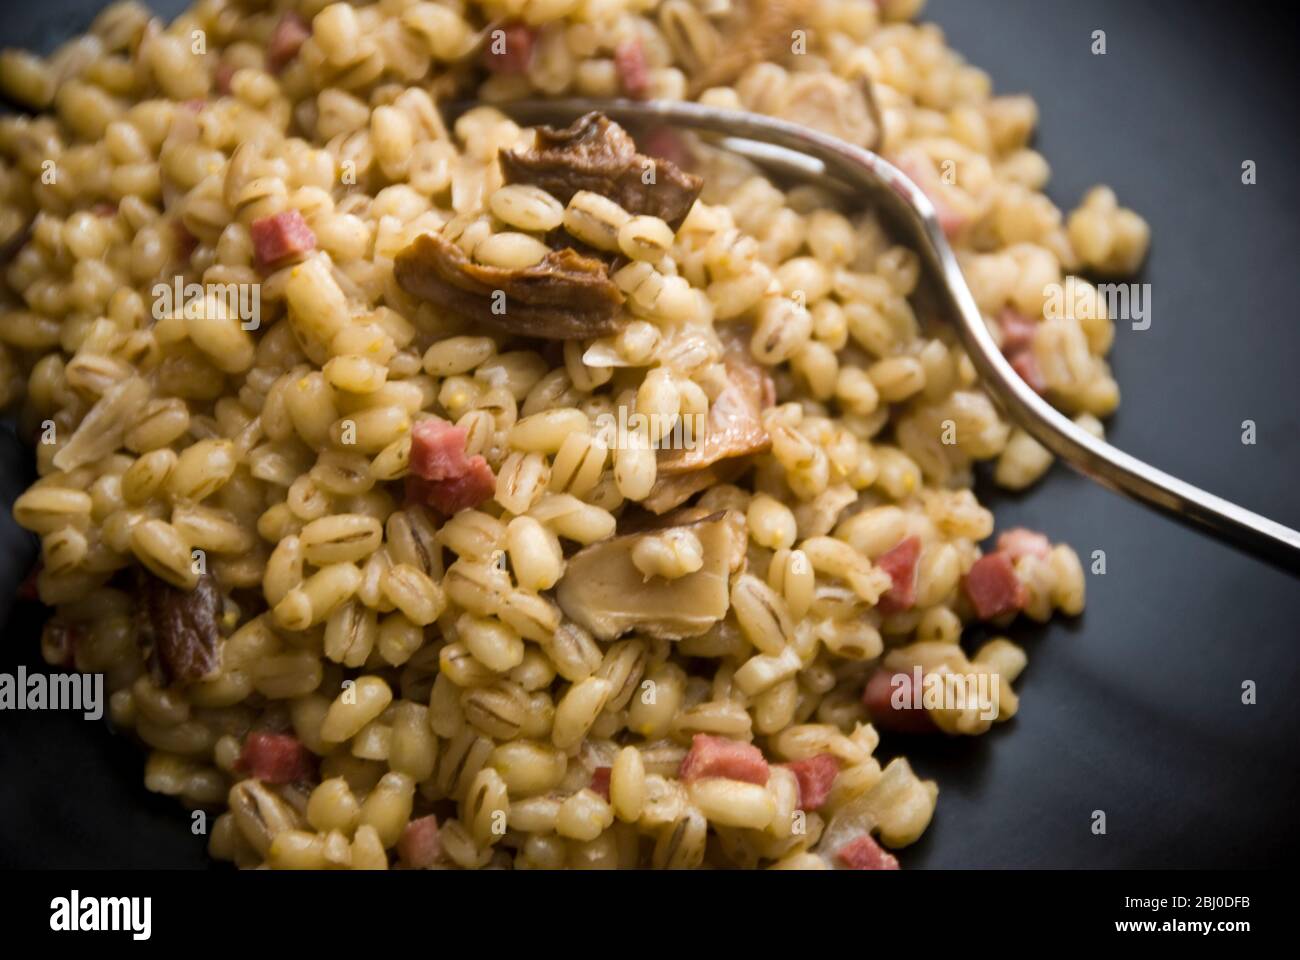 Barley risotto made with dried wild mushrooms, diced smoked ham, onions and chicken stock. - Stock Photo